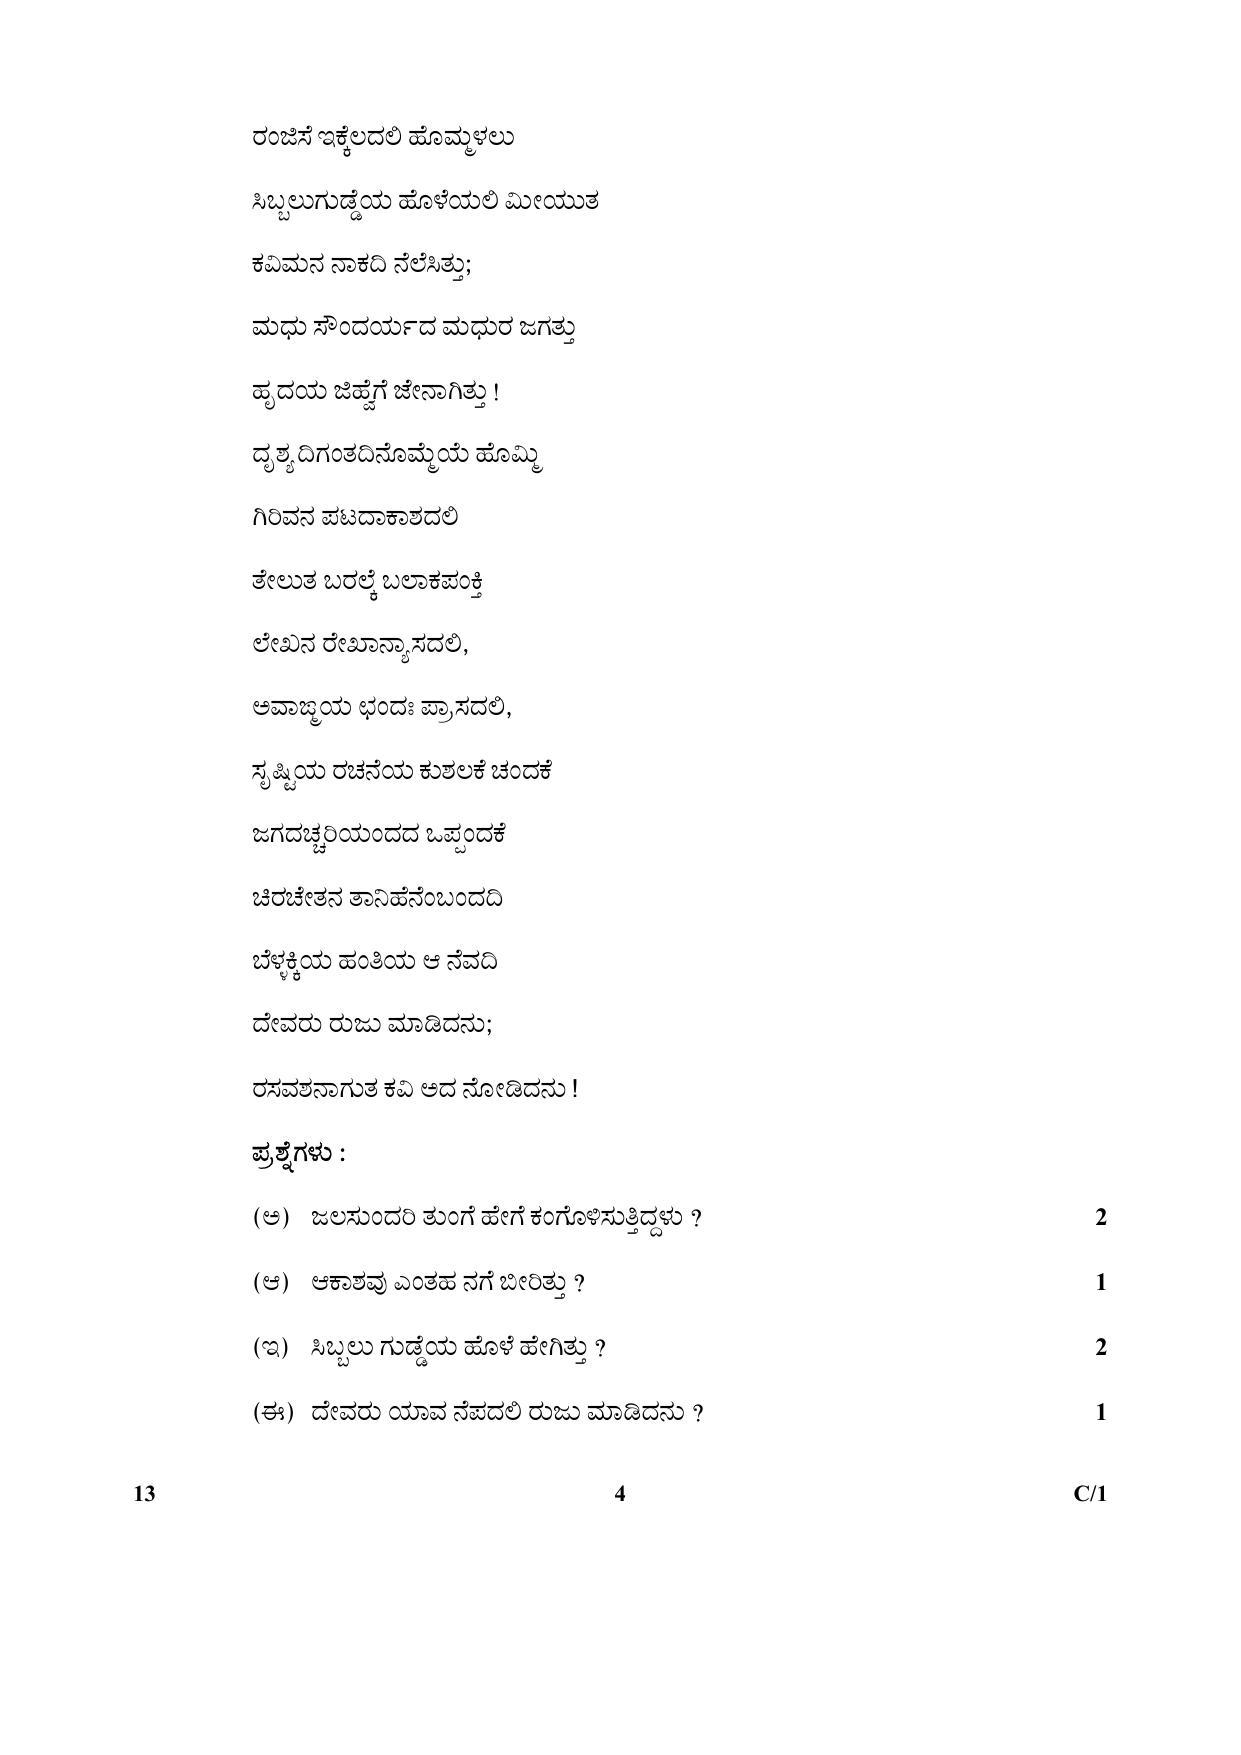 CBSE Class 10 13 (Kannada) 2018 Compartment Question Paper - Page 4